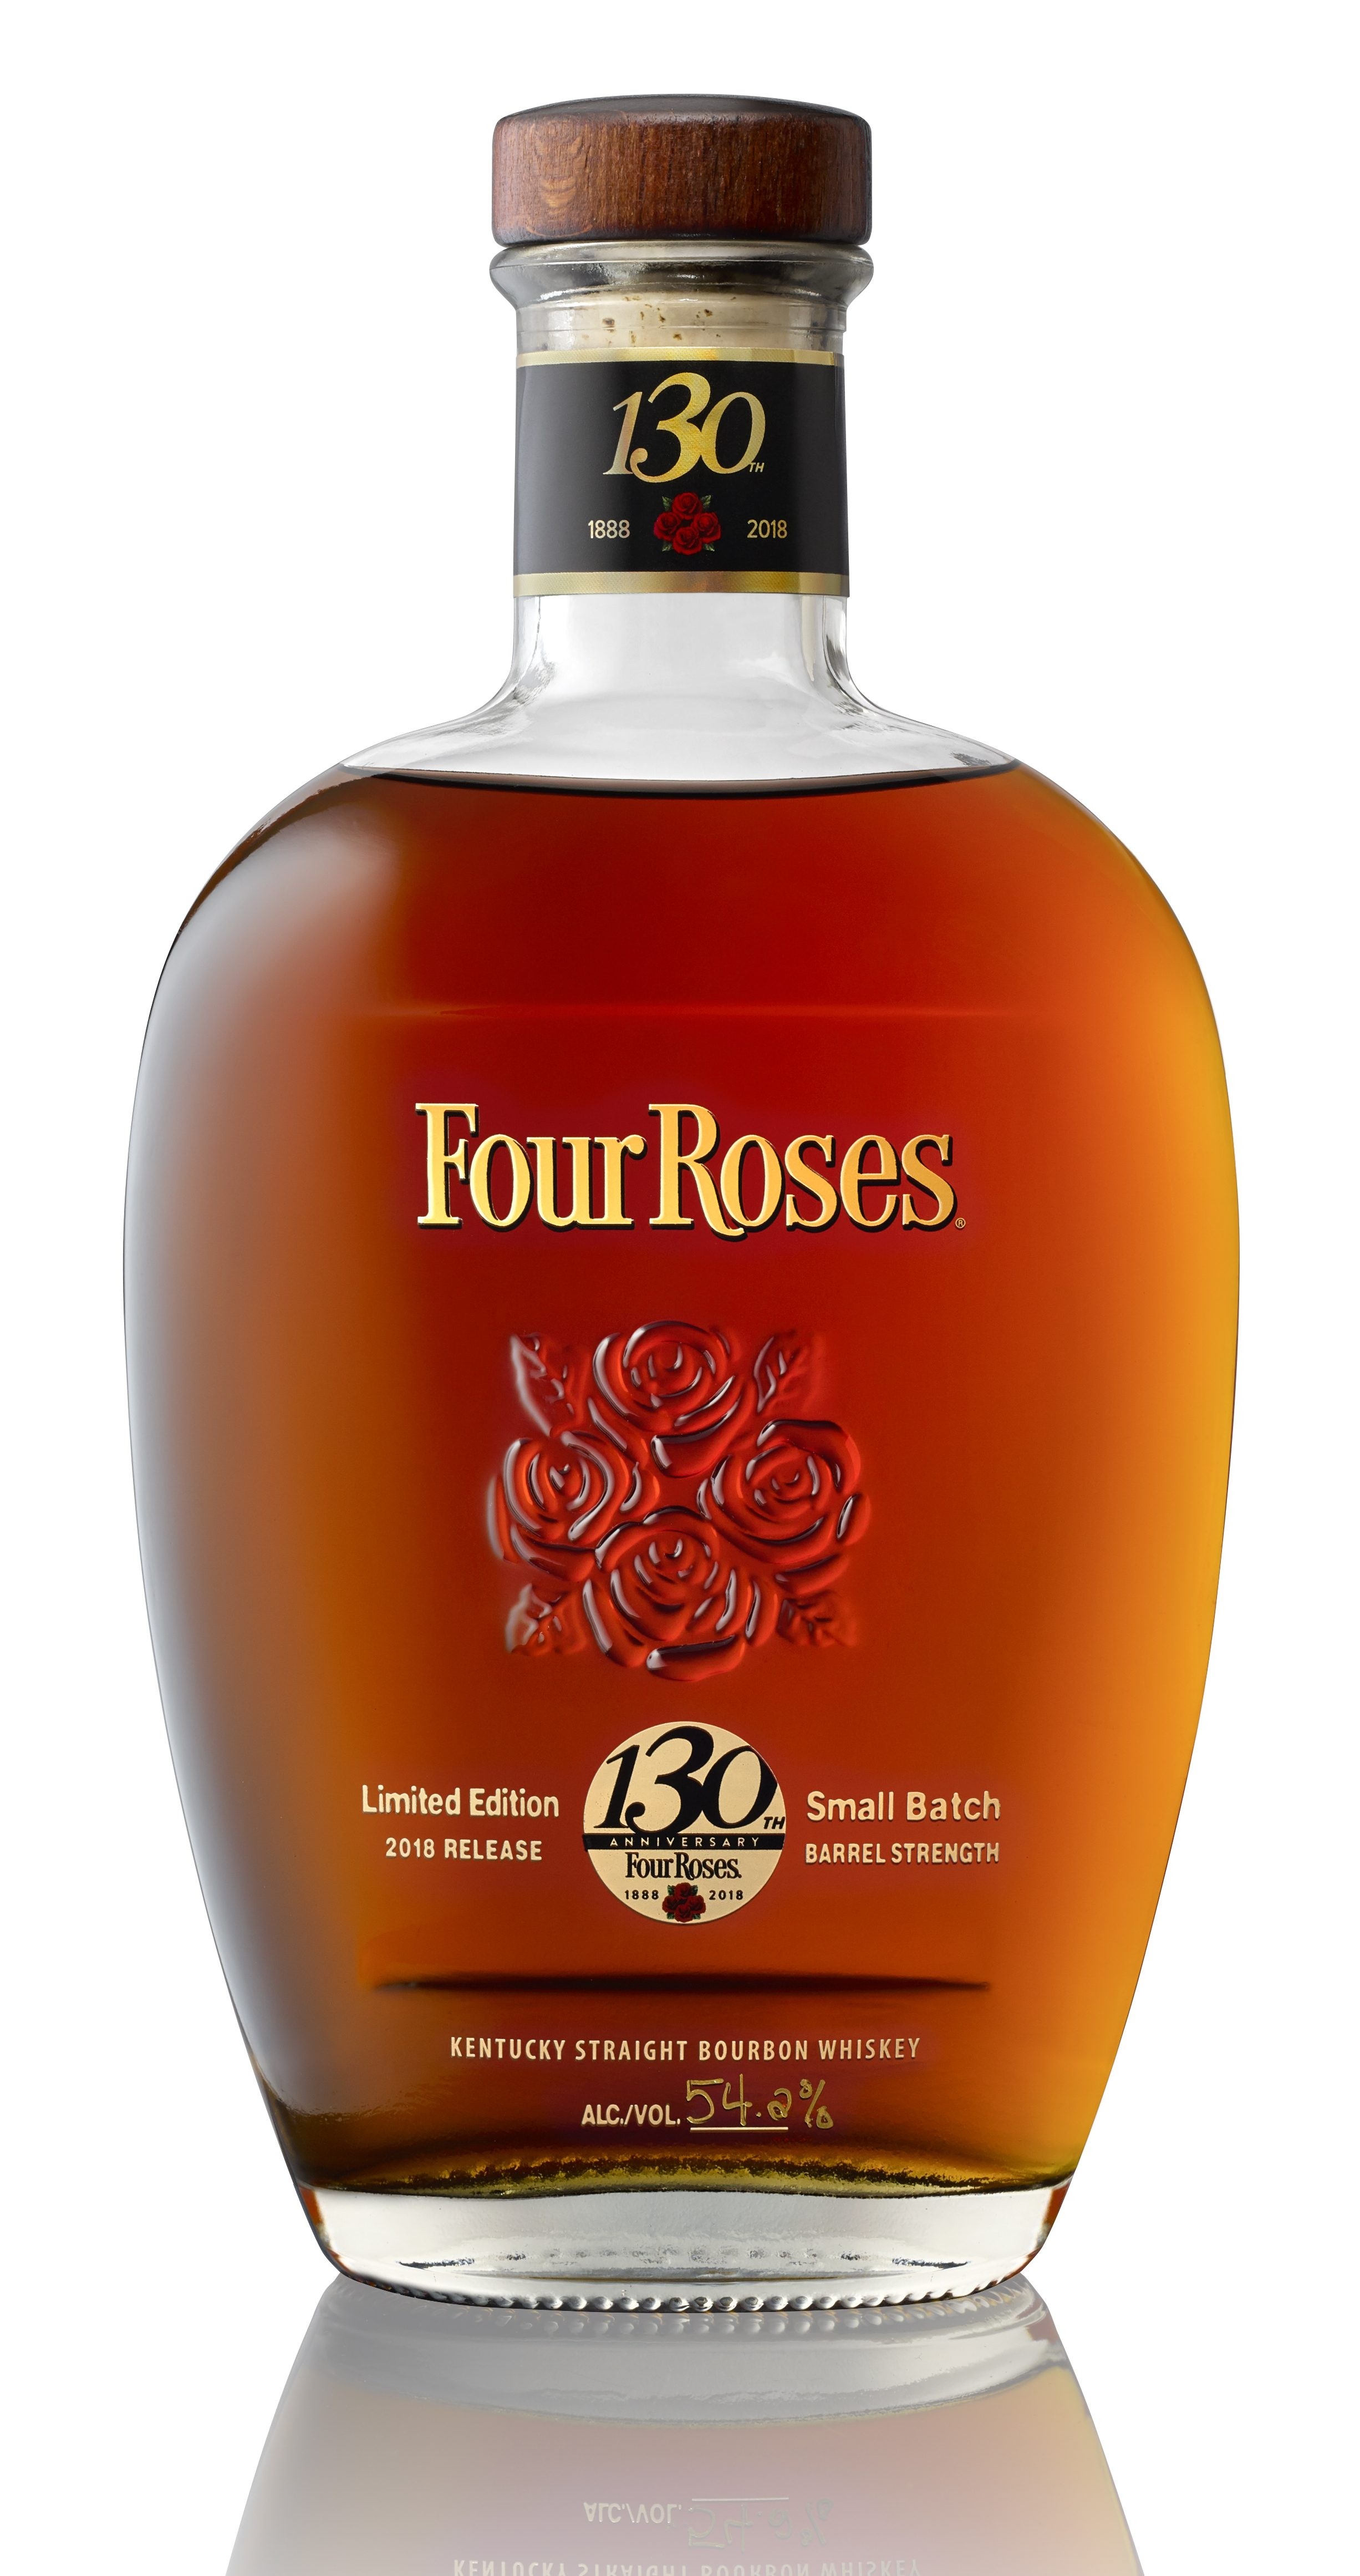 Four Roses Bourbon Limited Release 130th Anniversary 2018 Release 108